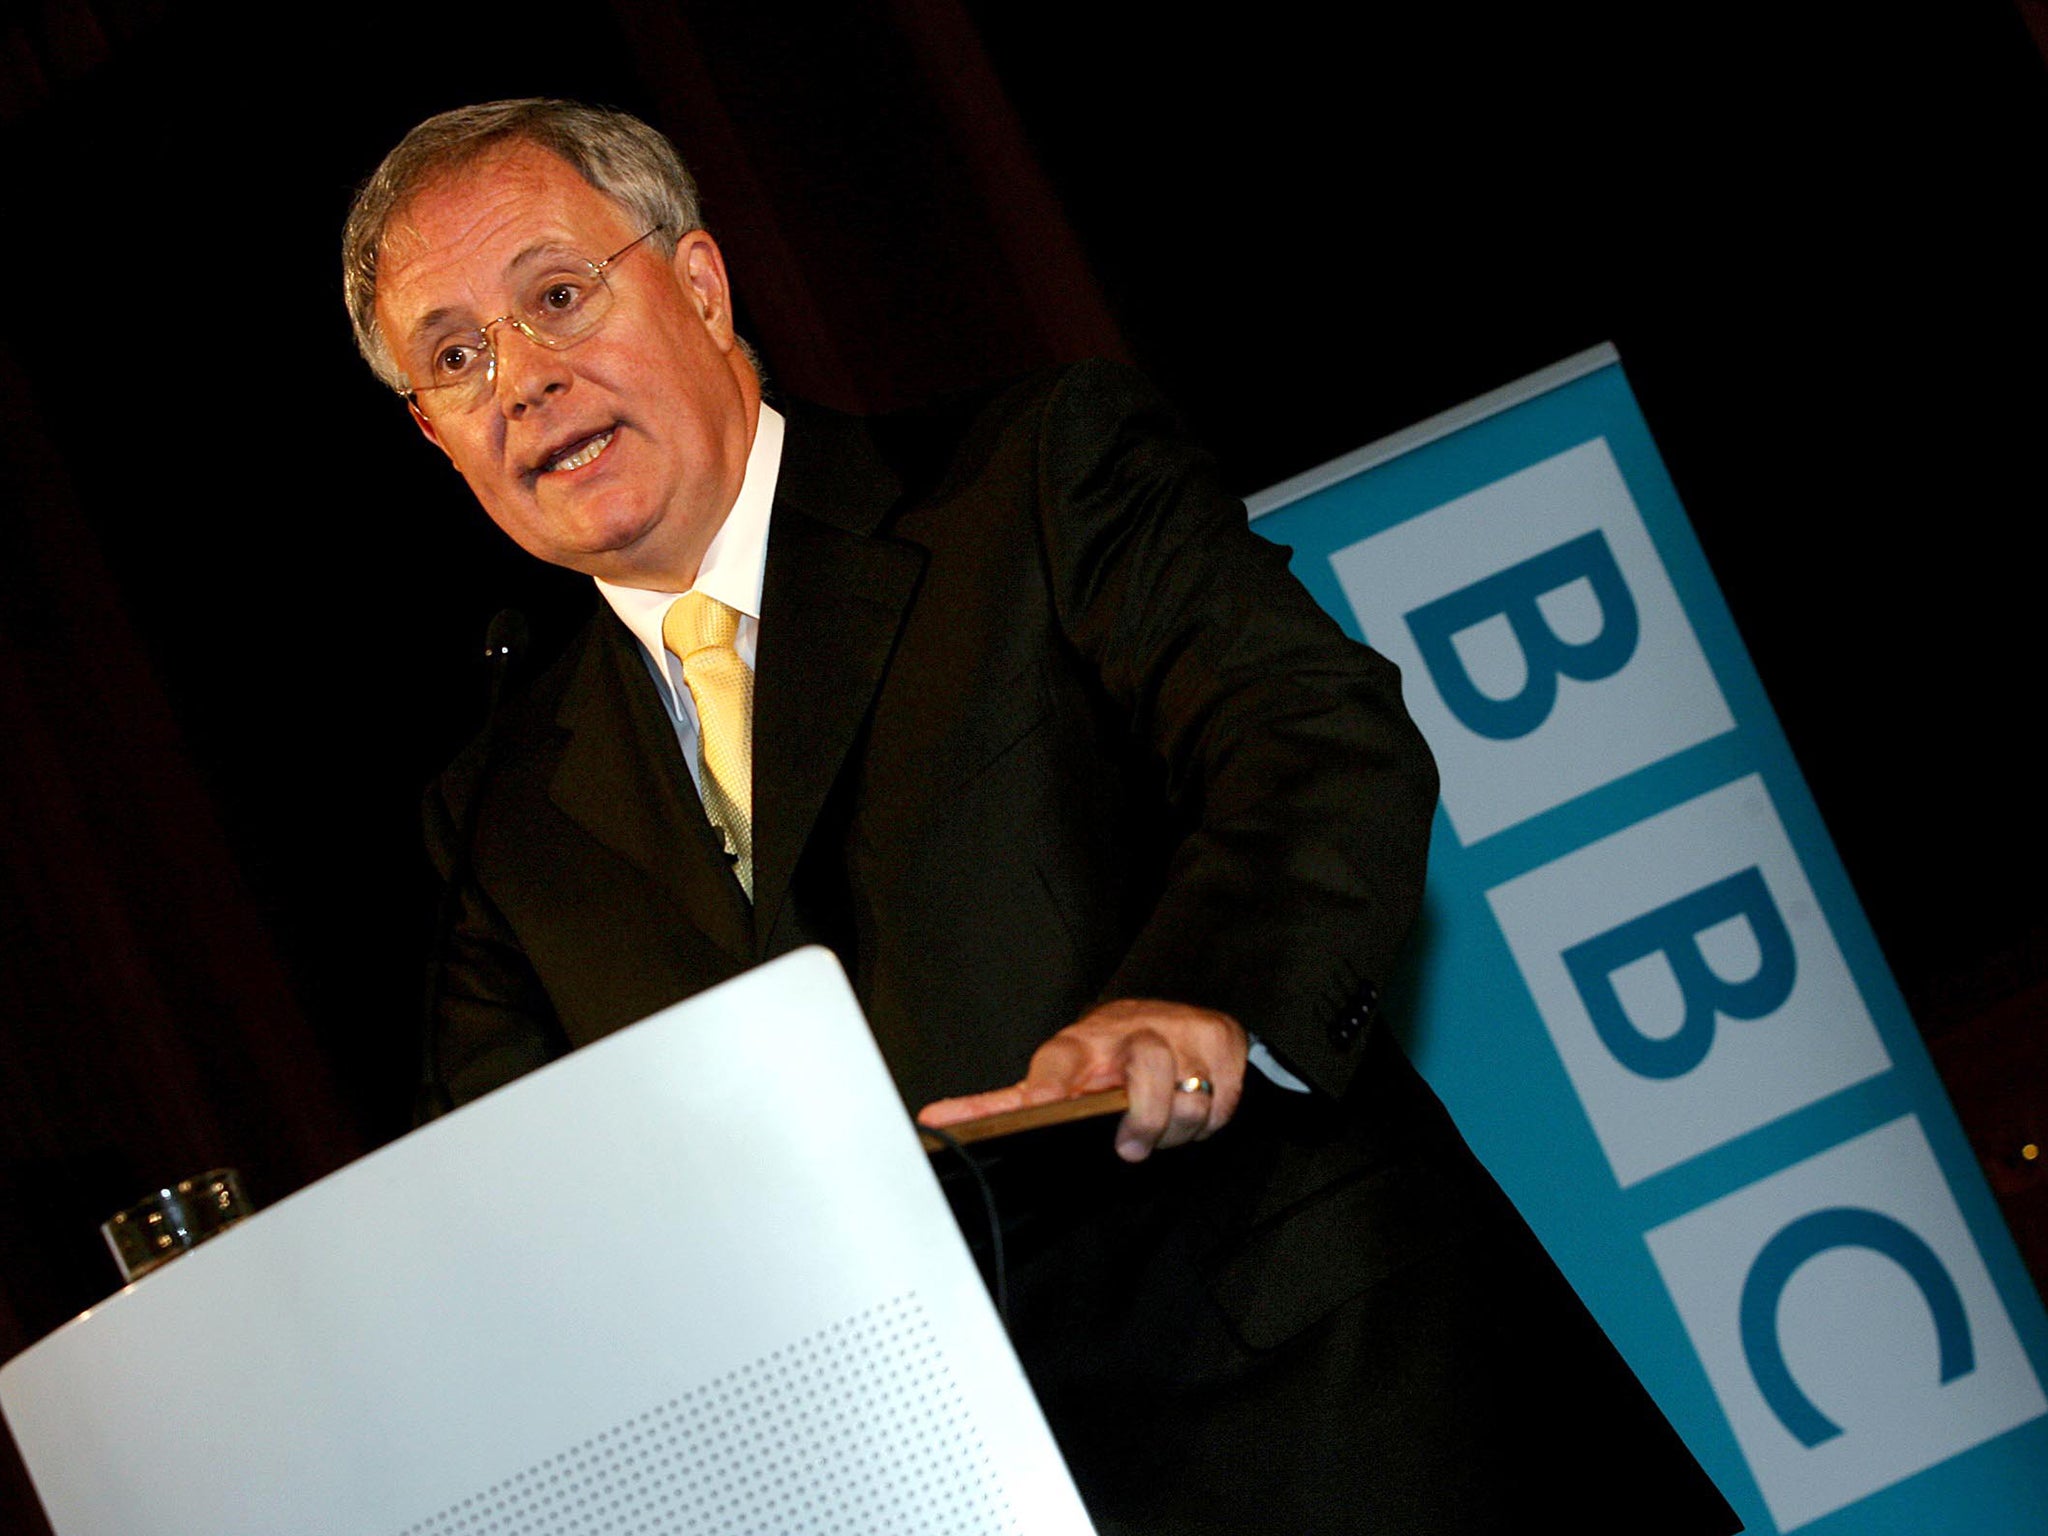 Sir Michael Lyons is a former chairman of the BBC Trust